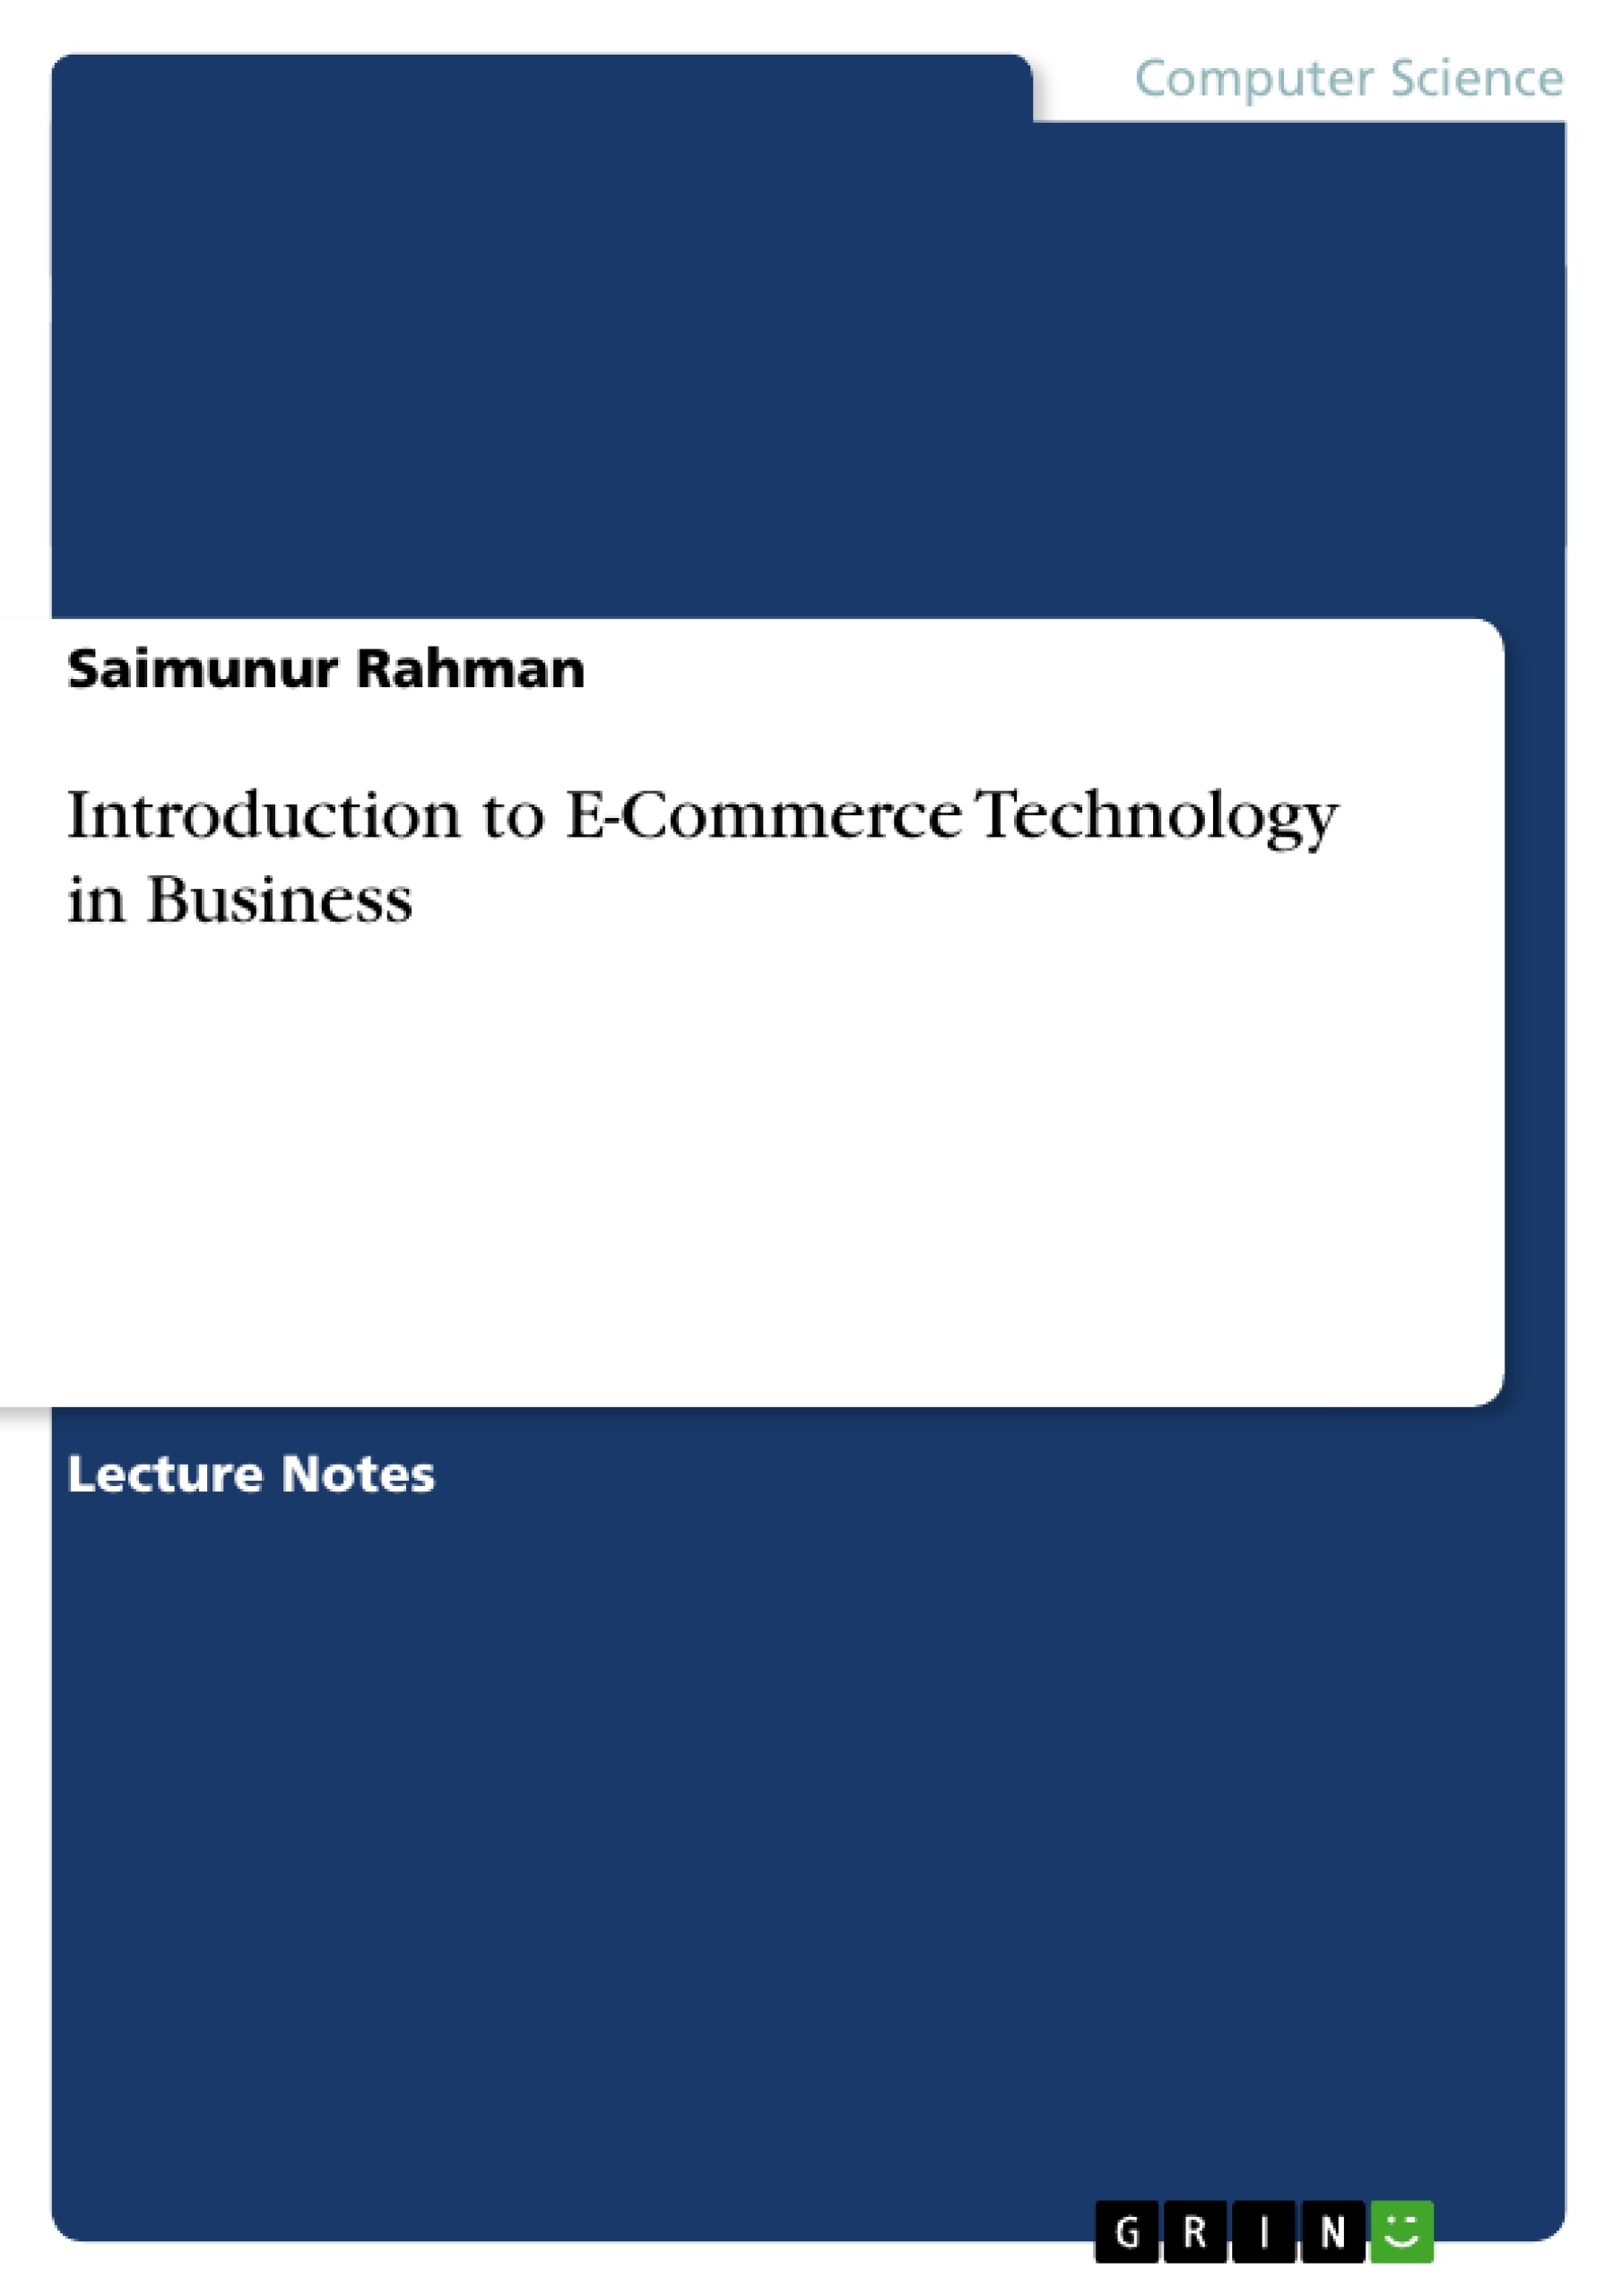 E-Commerce　Business　in　Technology　to　Introduction　GRIN